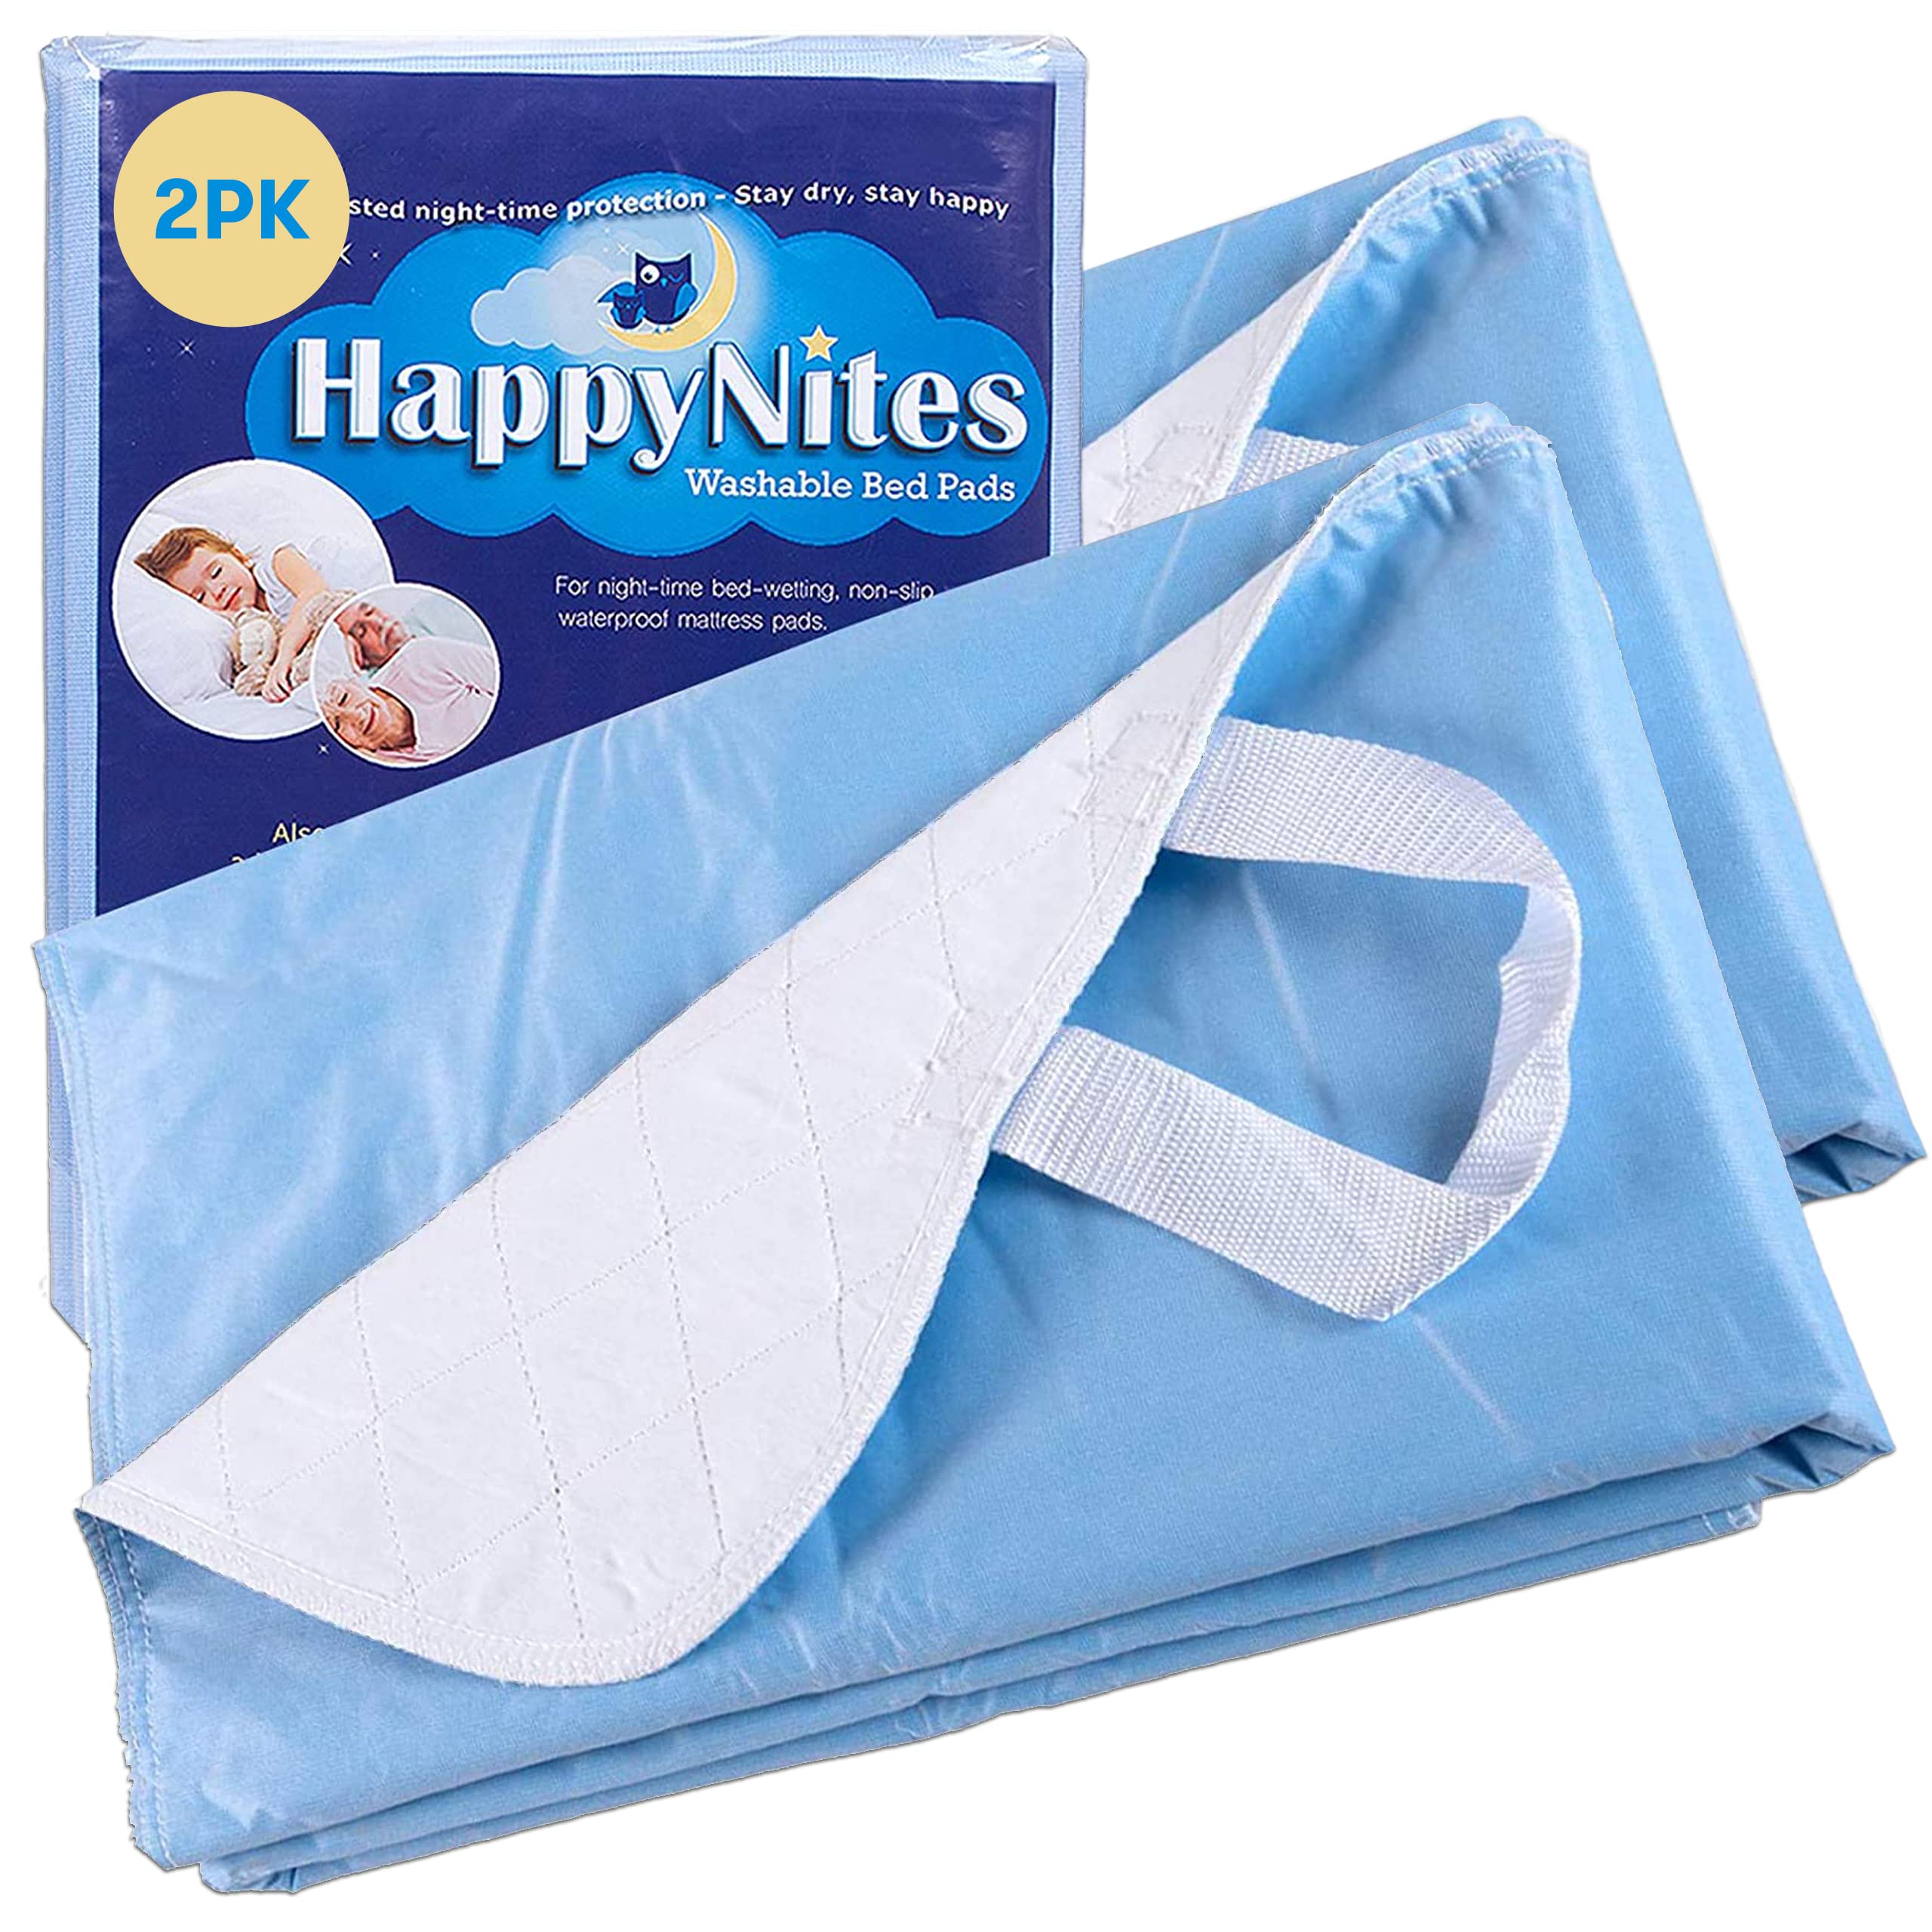 HappyNites Bed Pads for Seniors, Adults and Kids - 2 Pack with Handles,  36in X 52in, Washable, Water-Resistant, and Reusable - Bedwetting & Incontinence  Pads 2 Pack w/ Handles